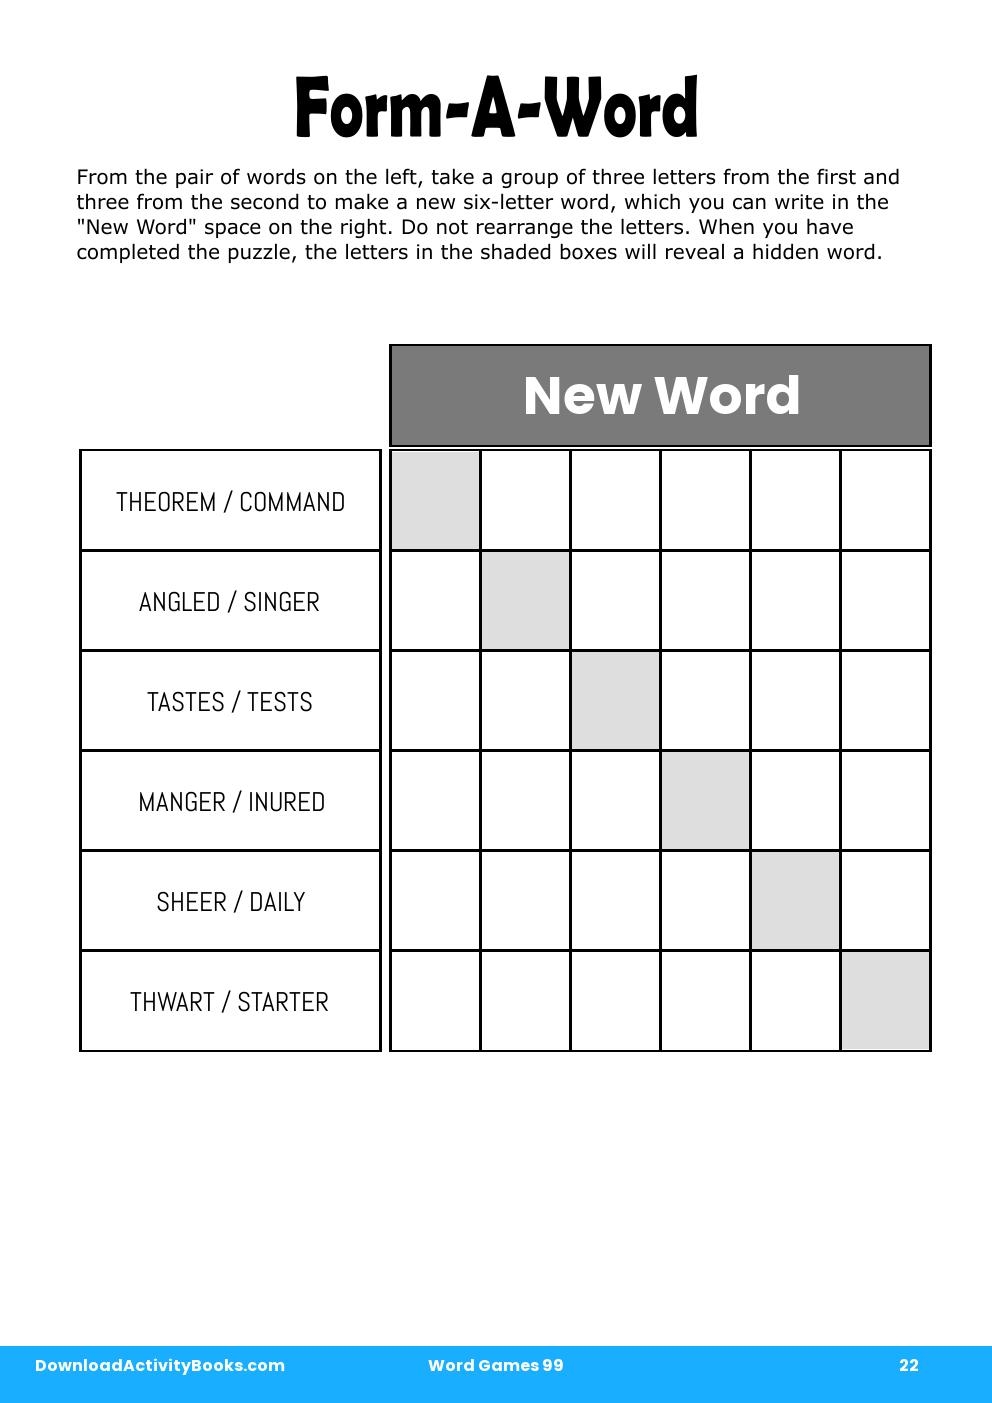 Form-A-Word in Word Games 99